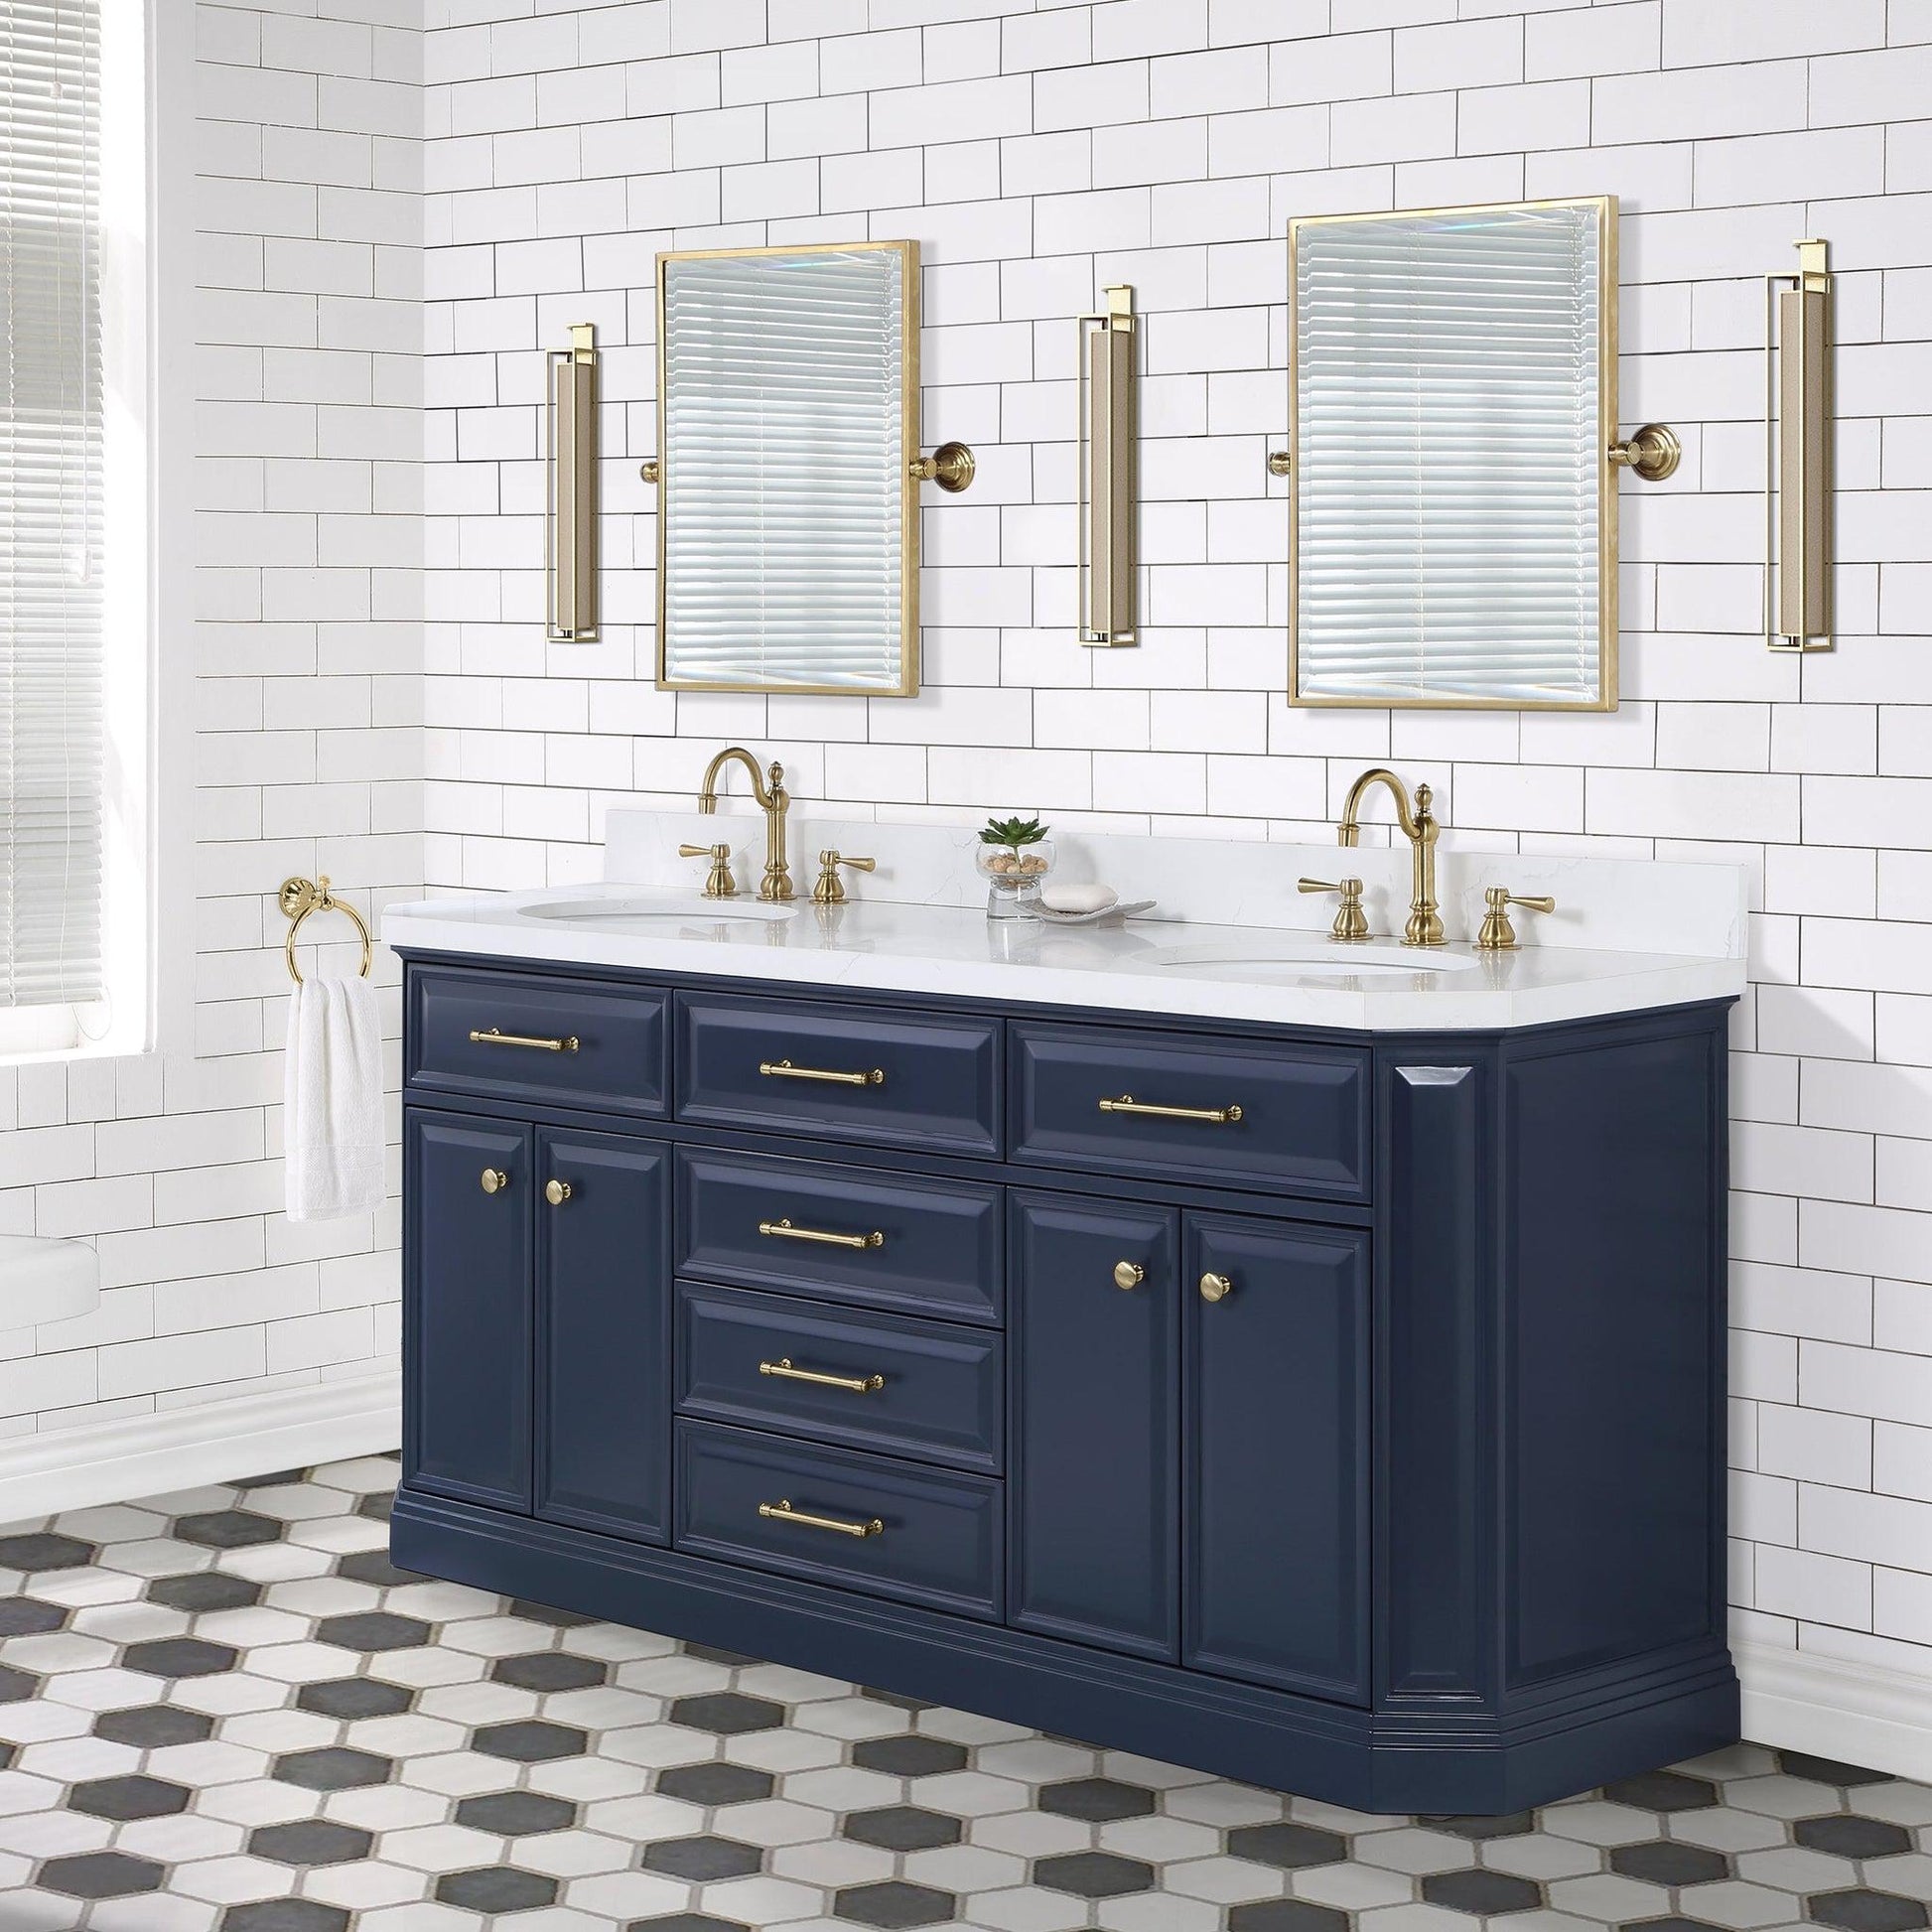 Water Creation Palace 72" Double Sink White Quartz Countertop Vanity in Monarch Blue with Hook Faucets and Mirrors